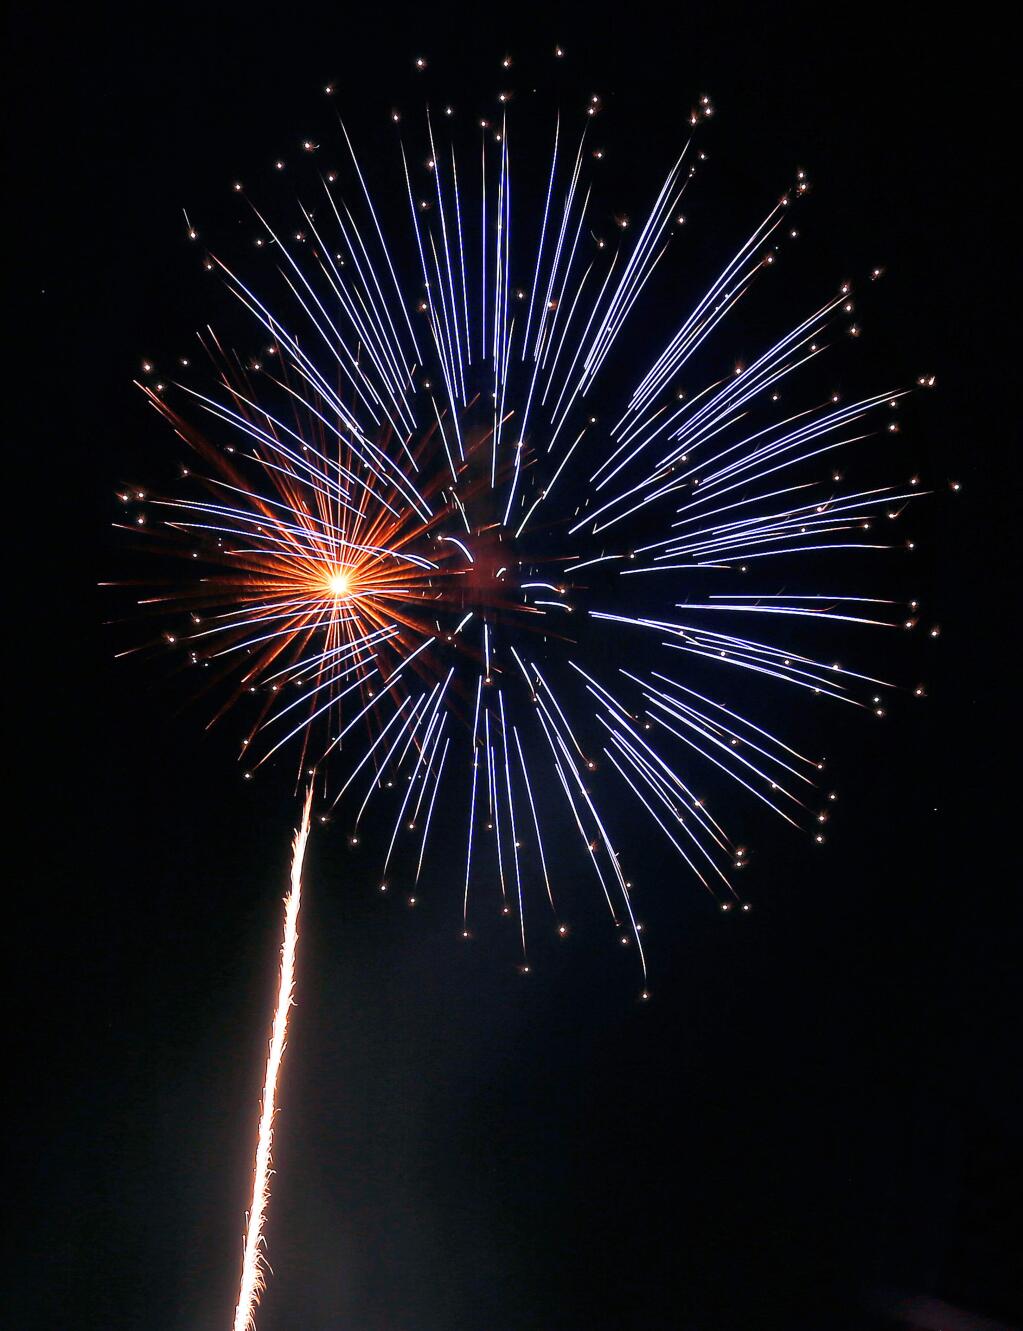 The “4th of July Fireworks Festival” at the Sonoma-Marin Fairgrounds in 2021. The annual fireworks display will be replaced with a laser light show this year. (ALVIN JORNADA/THE PRESS DEMOCRAT)